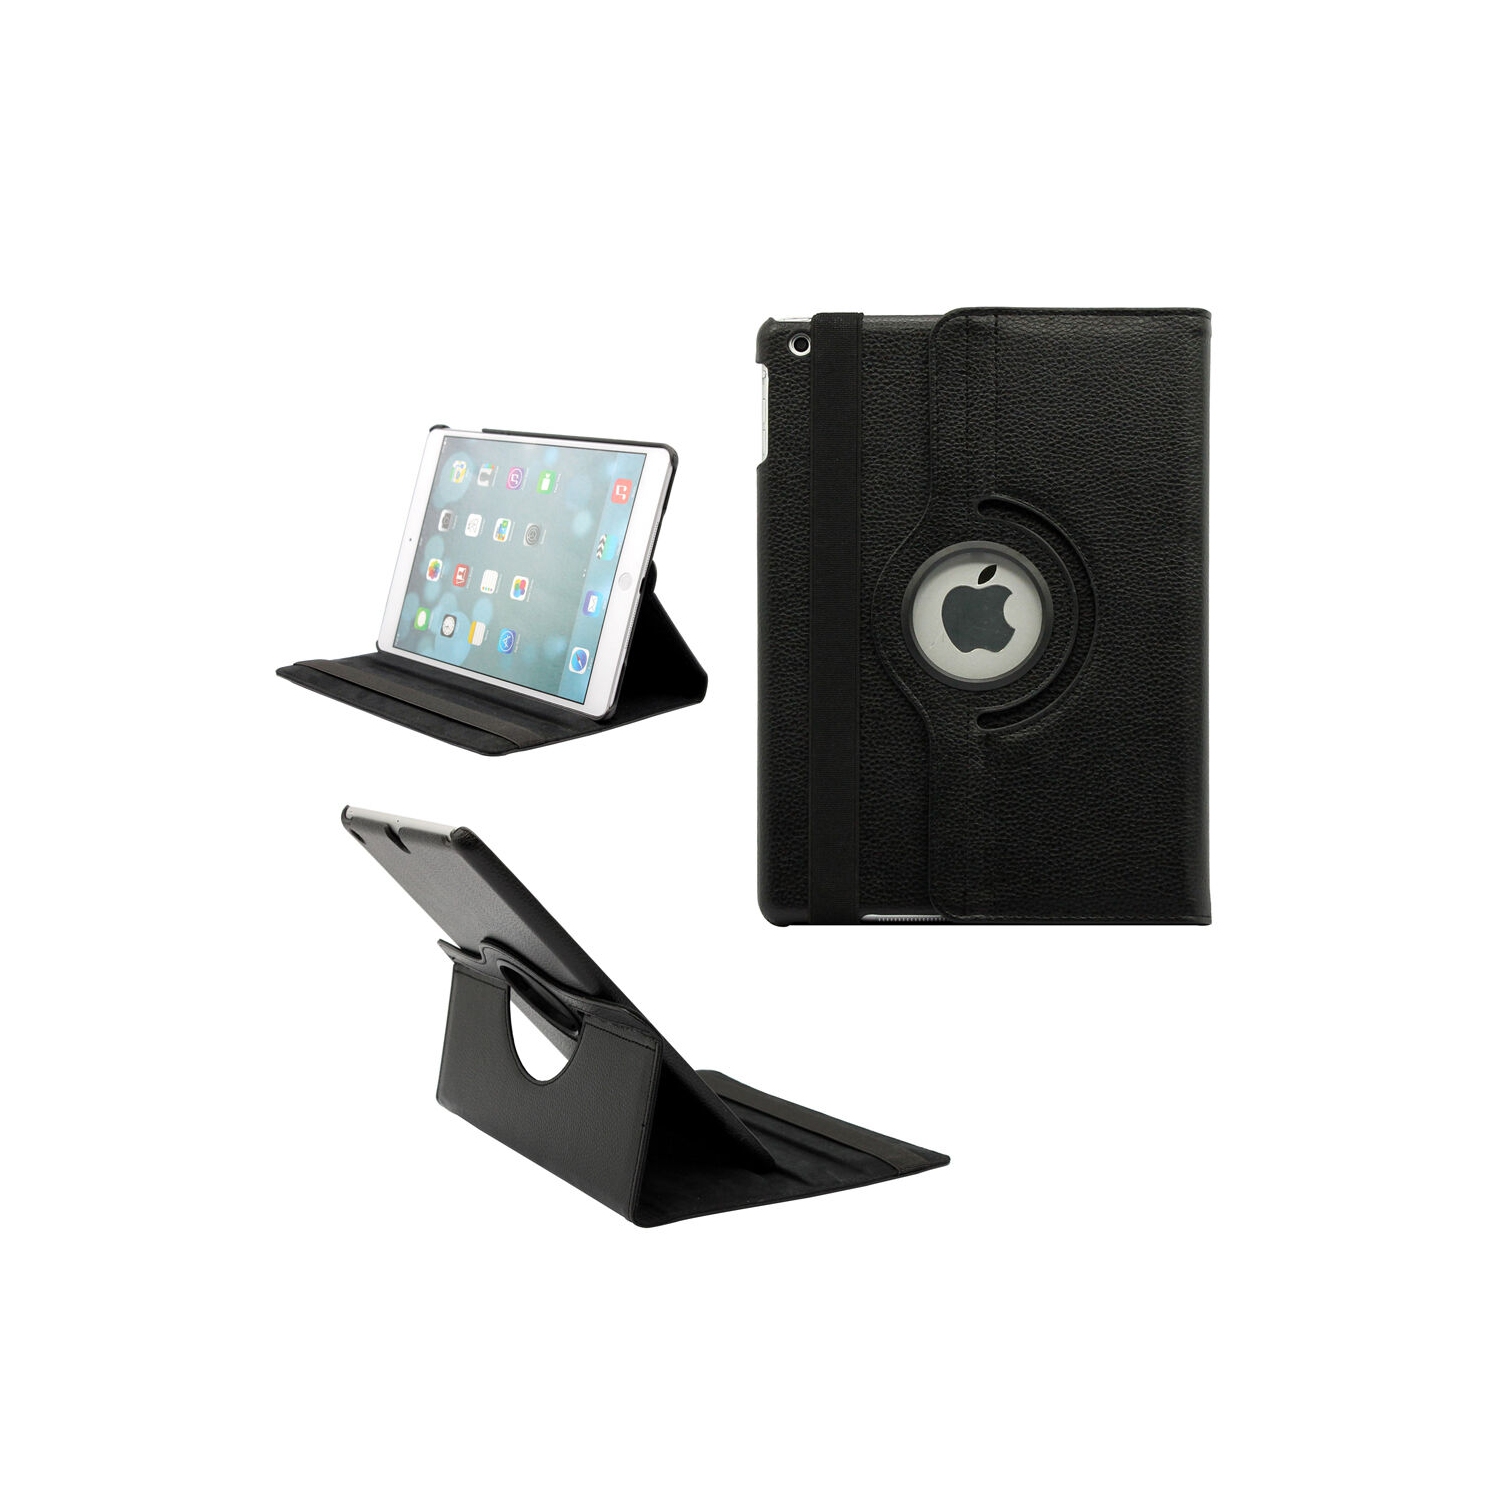 【CSmart】 360 Rotating PU Leather Stand Case Smart Cover for iPad Air 1 2 1st 2nd Gen, Black